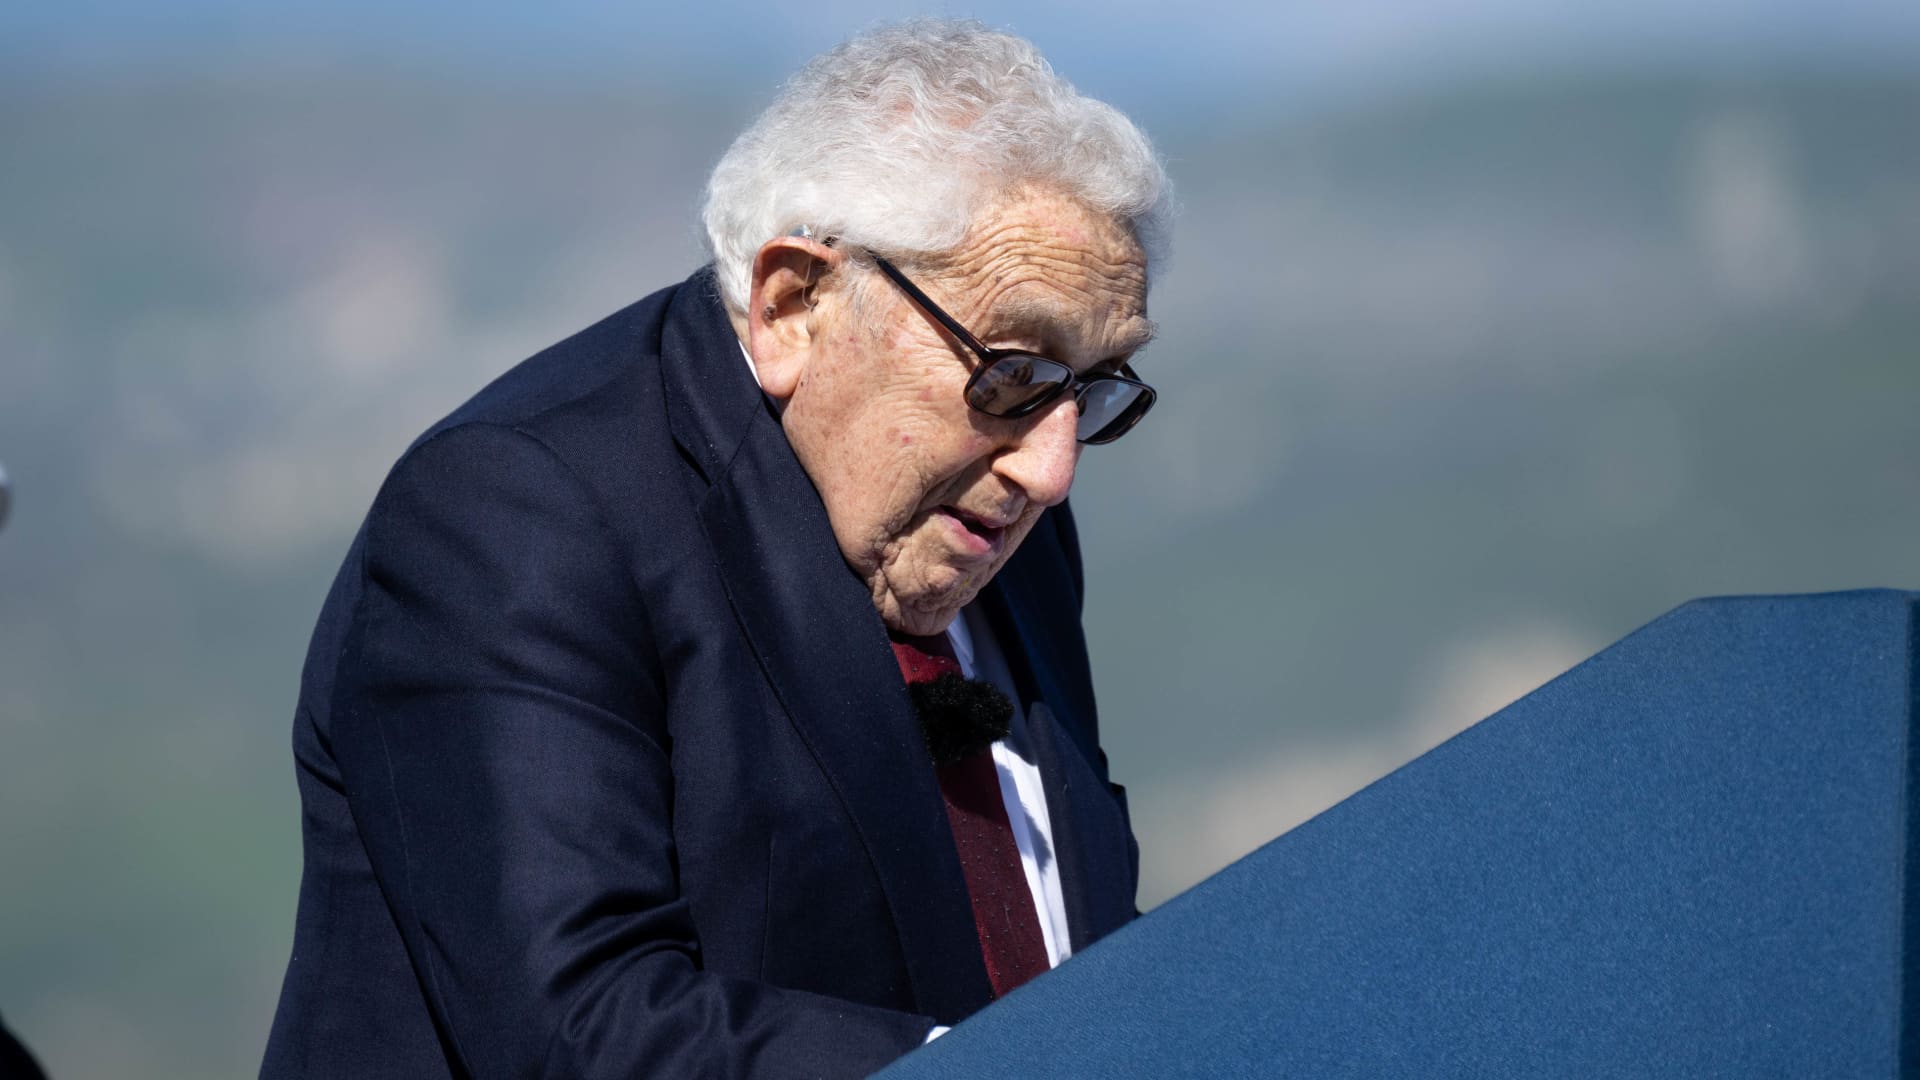 ‘Old friend’: Henry Kissinger meets China’s Xi Jinping in second surprise Beijing talks